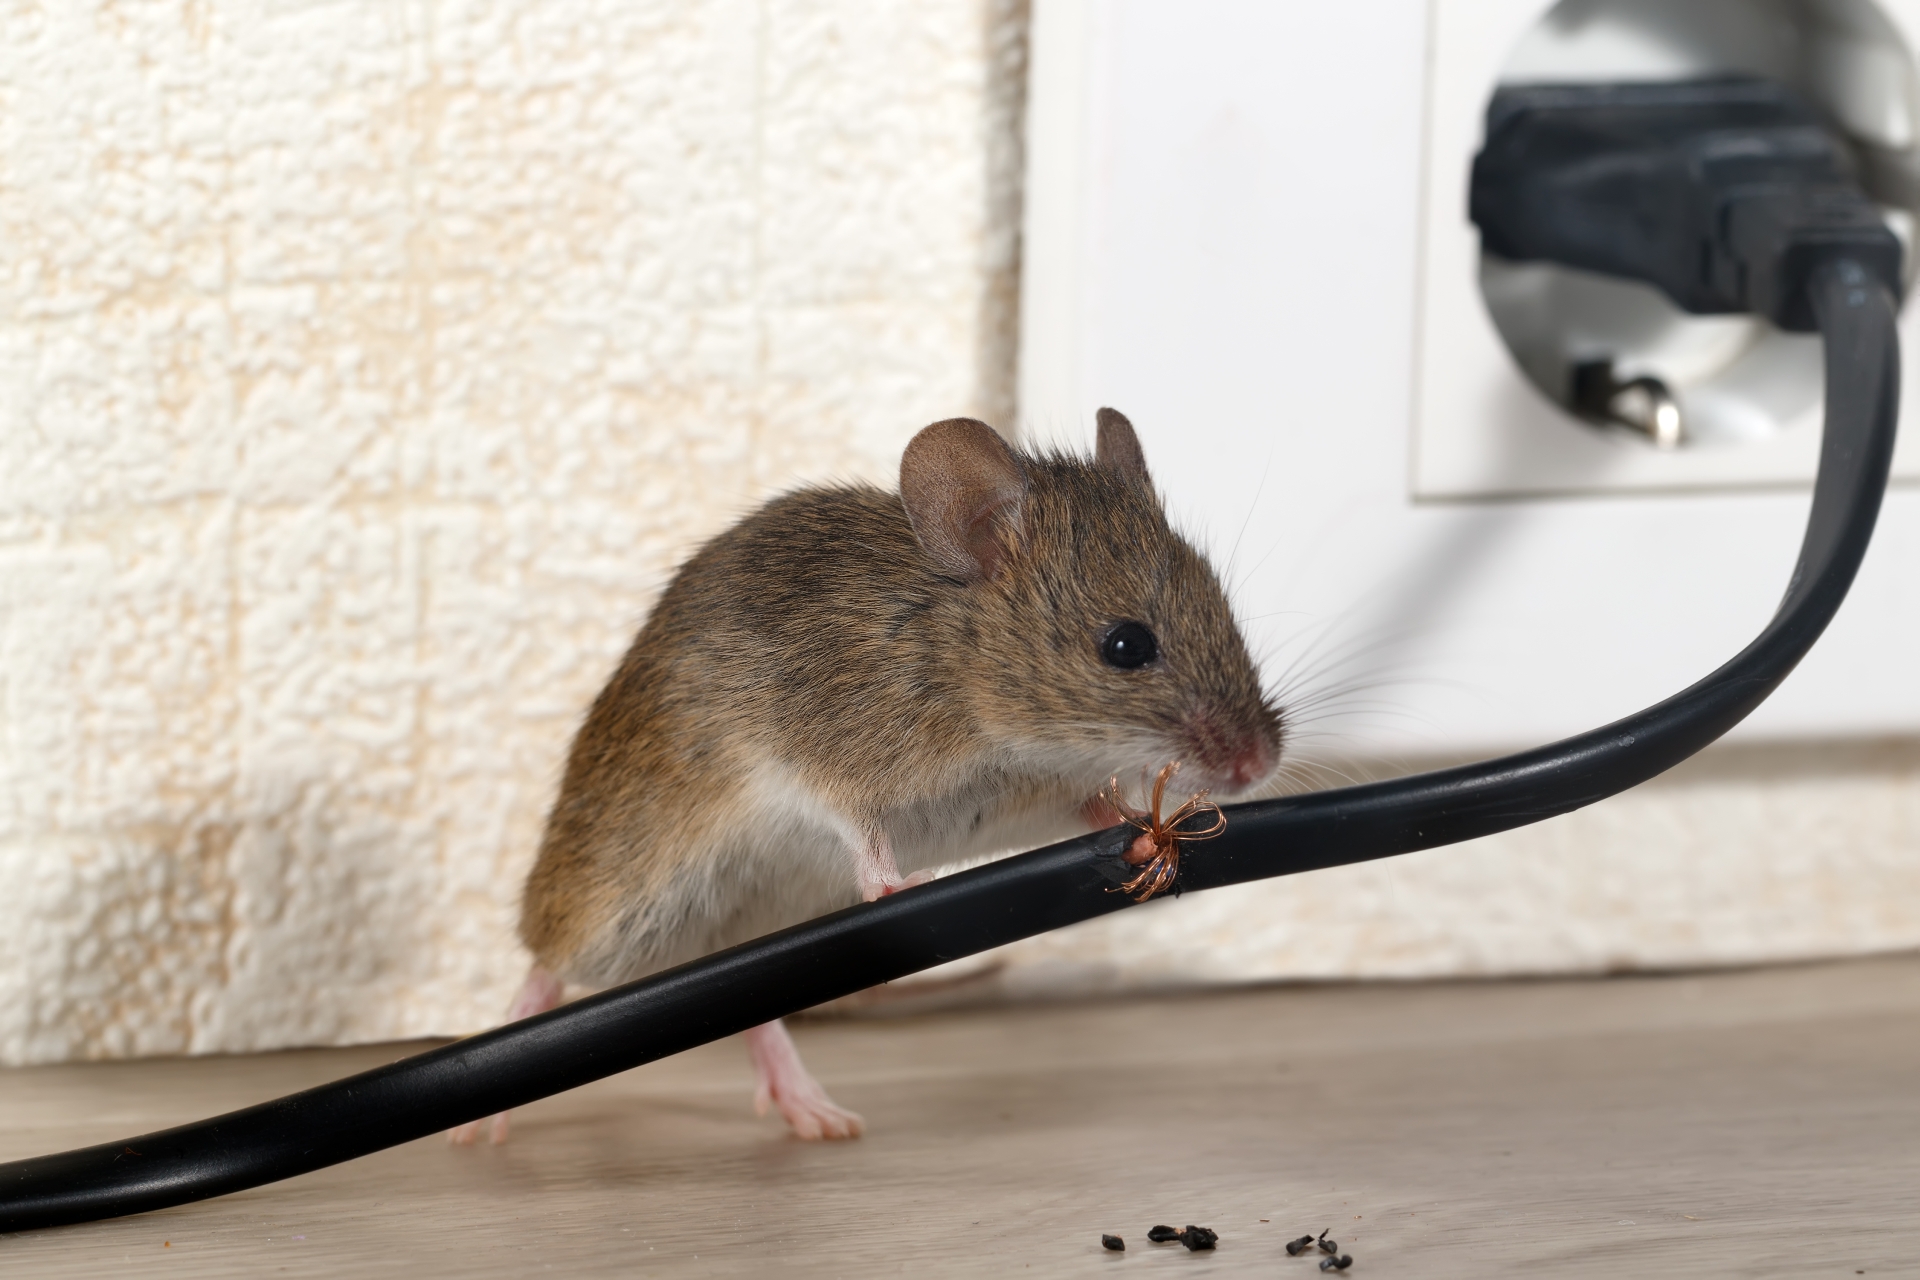 Mice Infestation, Pest Control in Woodford Green, Woodford, IG8. Call Now 020 8166 9746